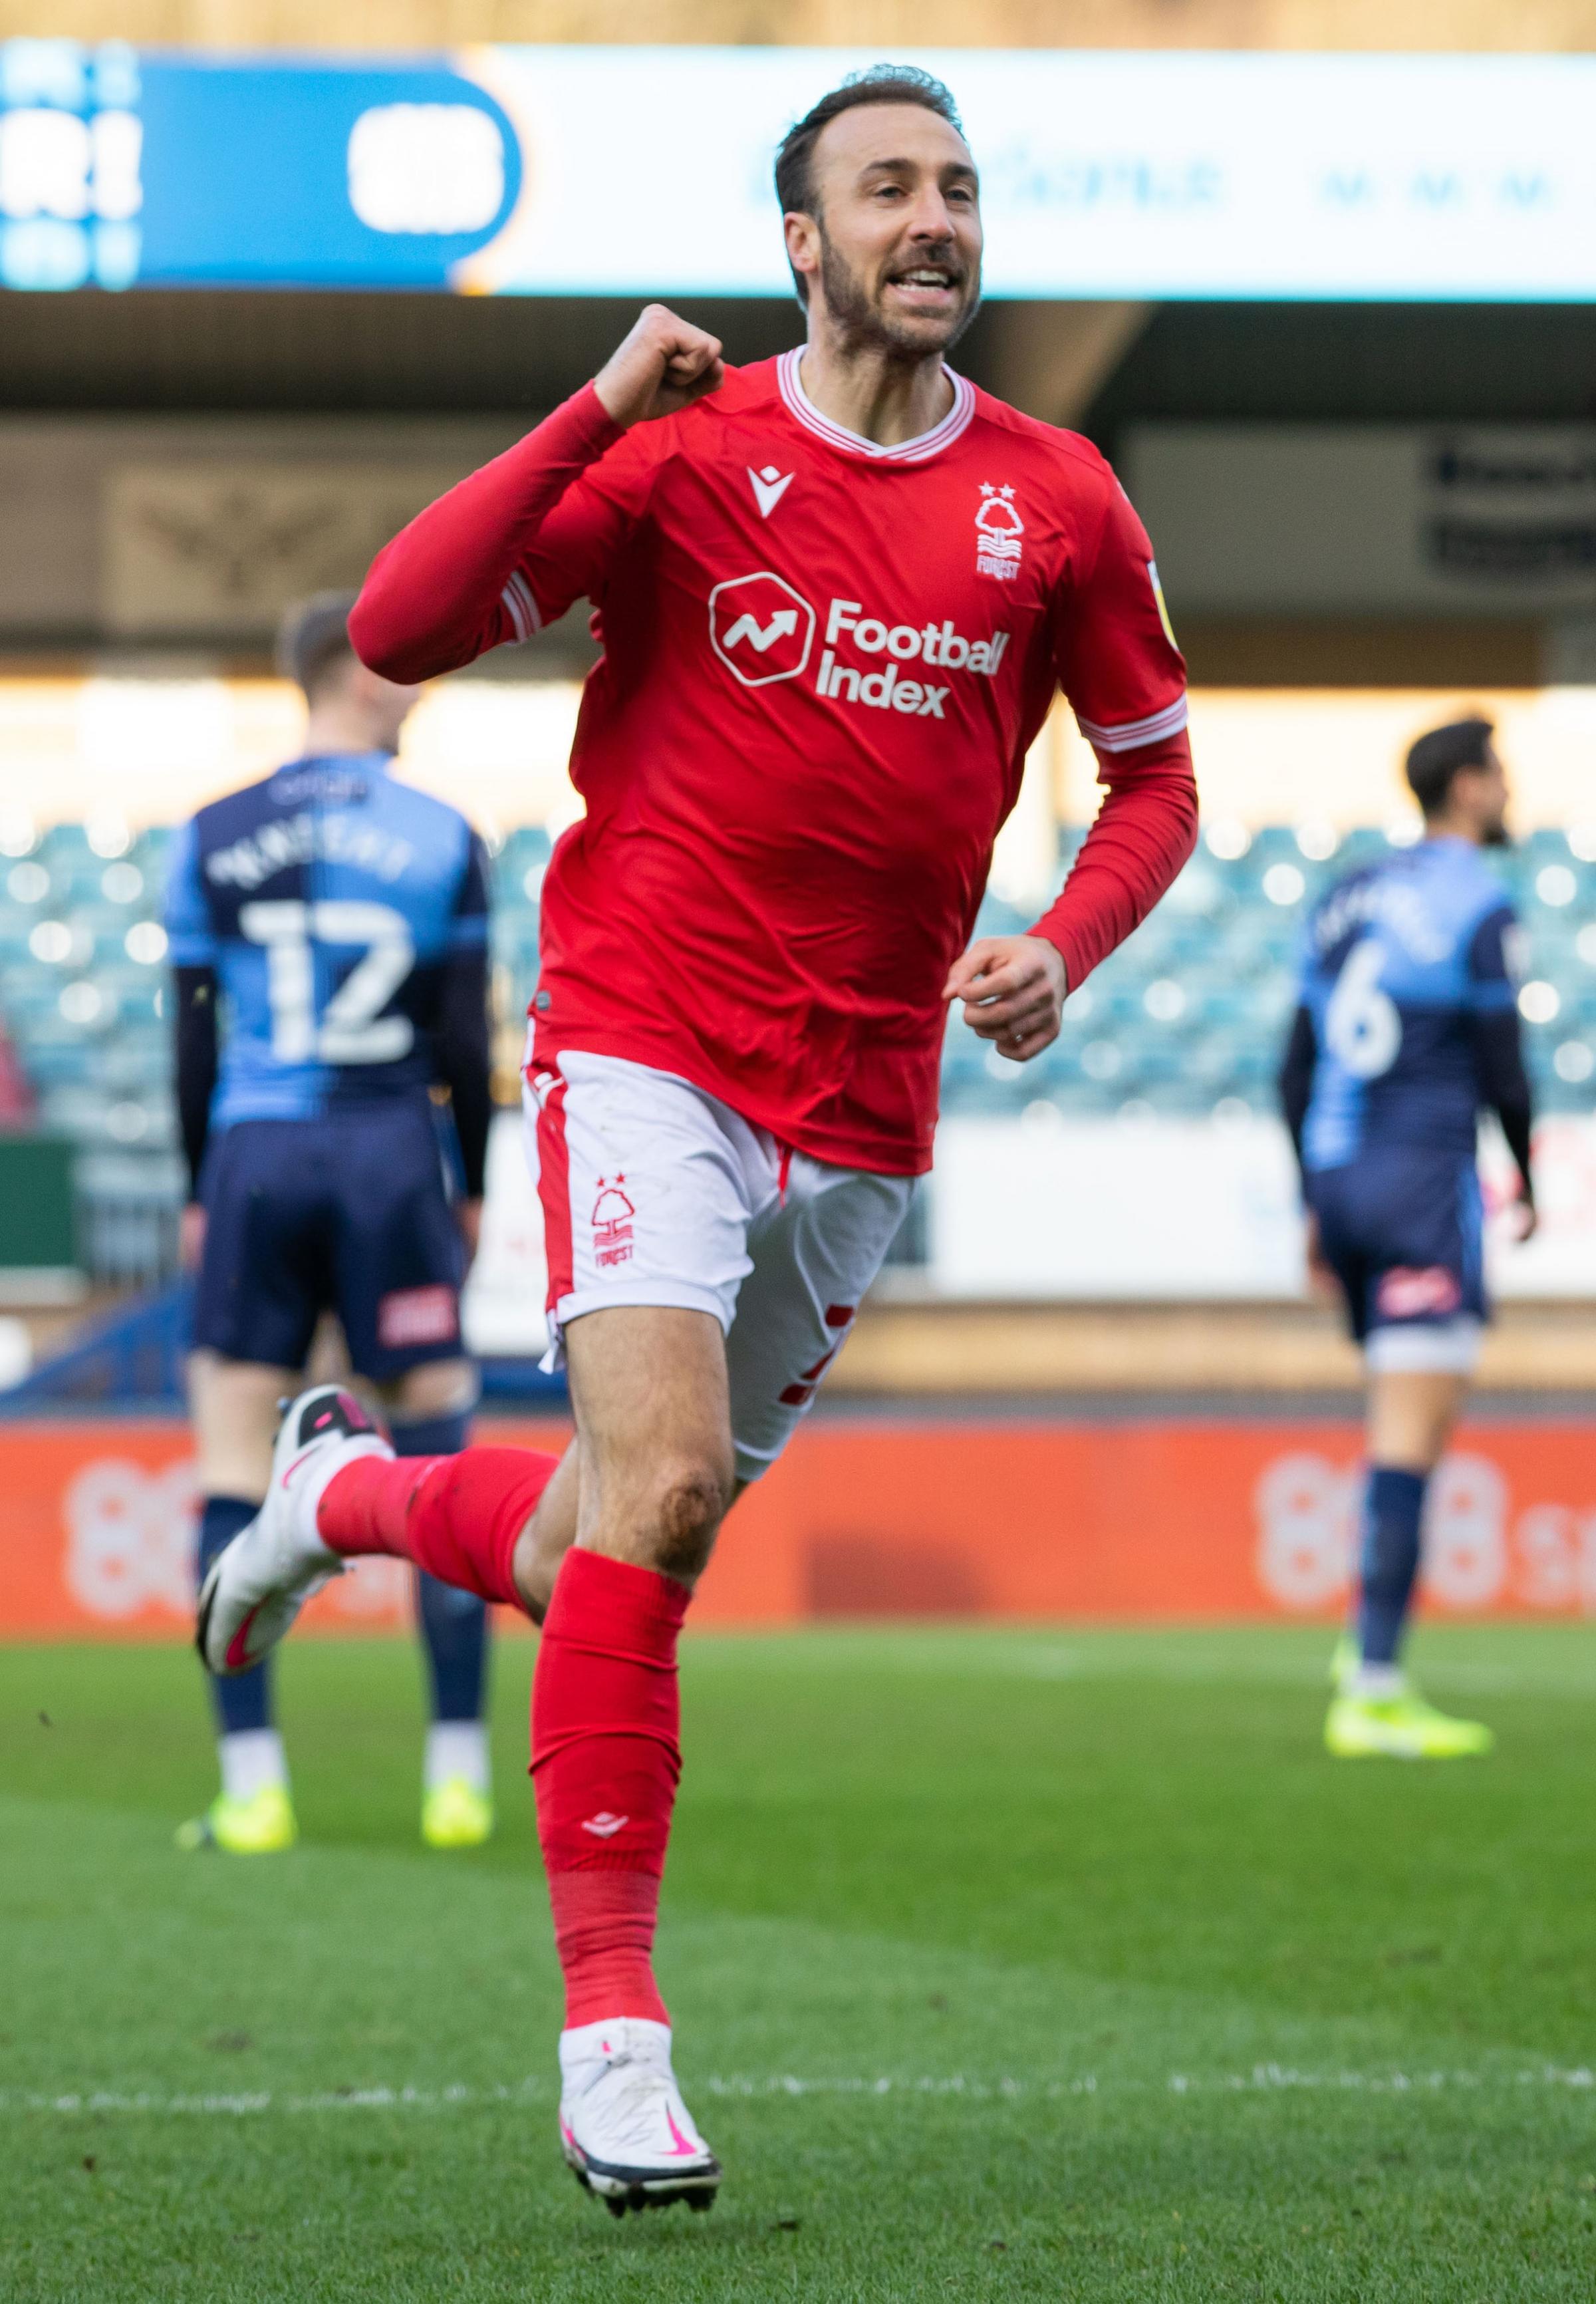 Glenn Murray scored a brace for Forest against Wycombe - they were his first goals for the club (Aaron Chown/PA)